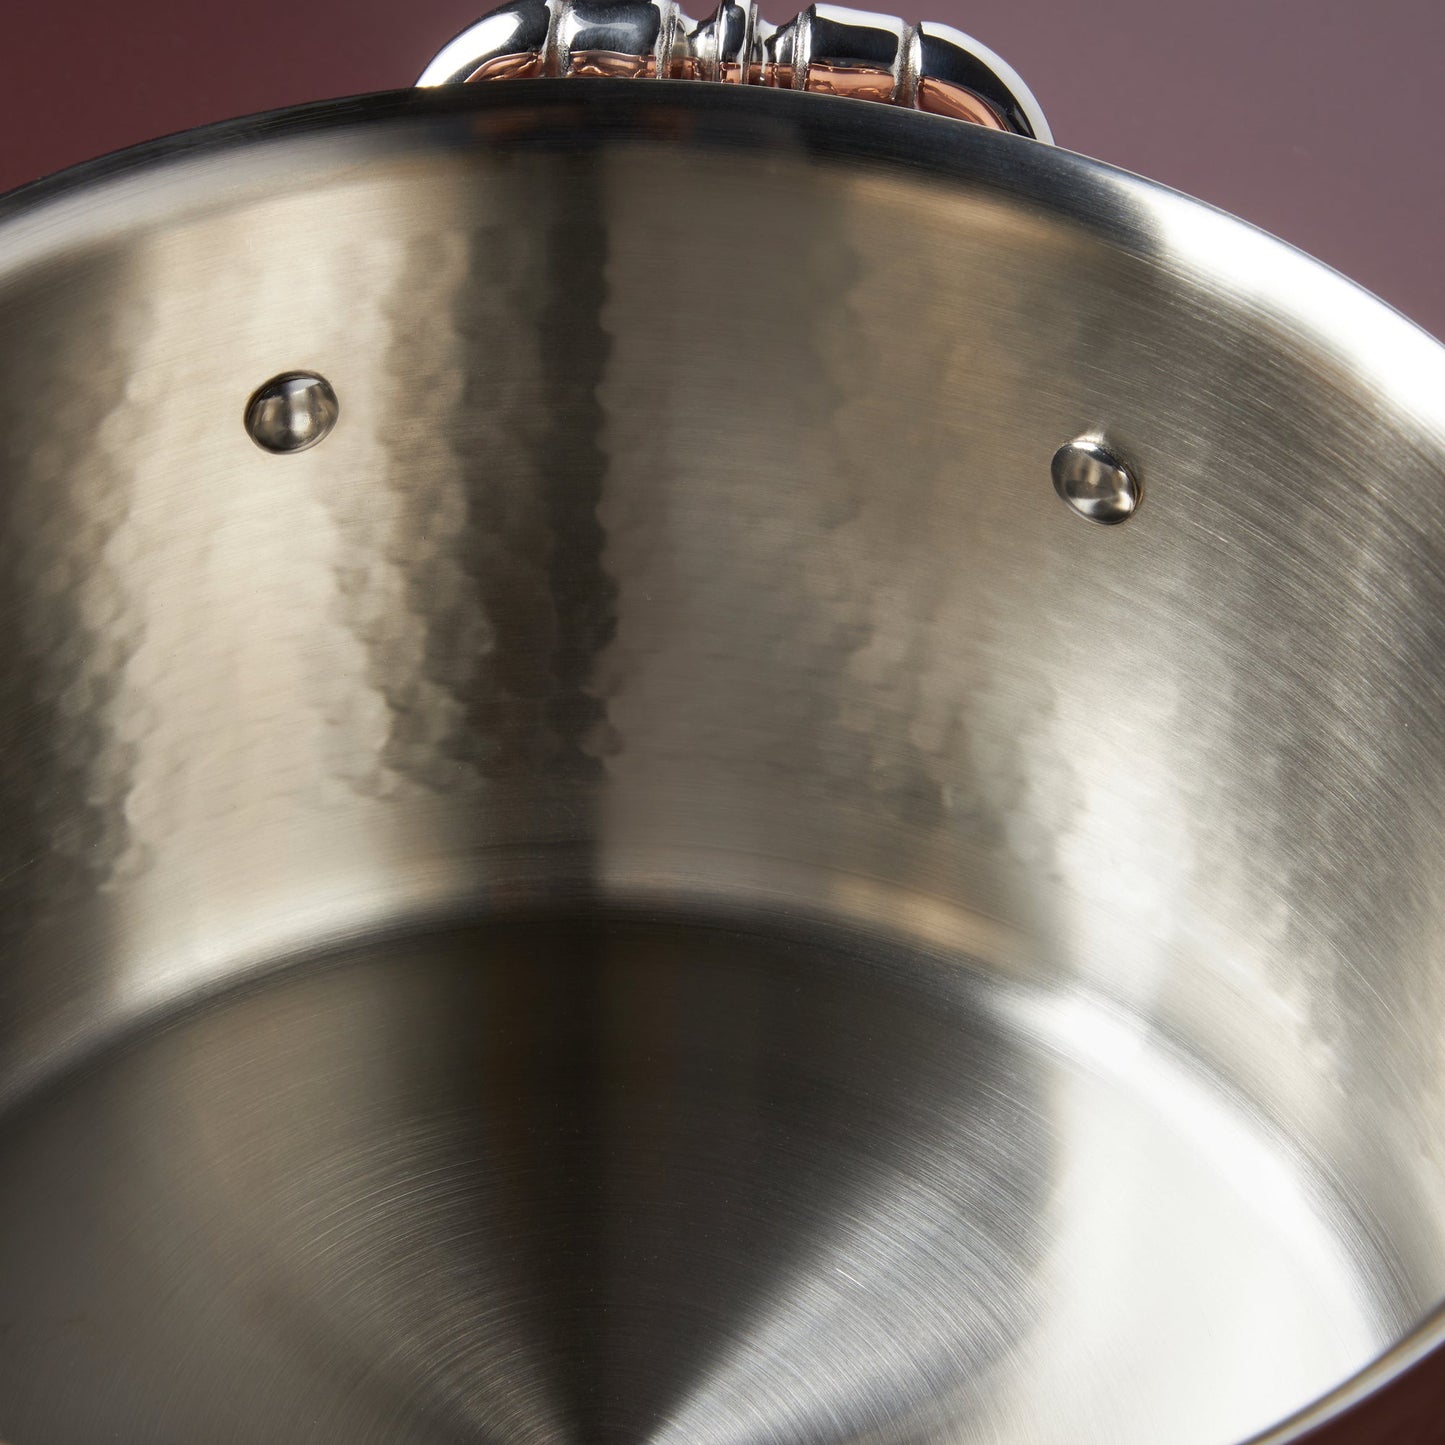 hammered stainless steel lining in large stockpot from Ruffoni